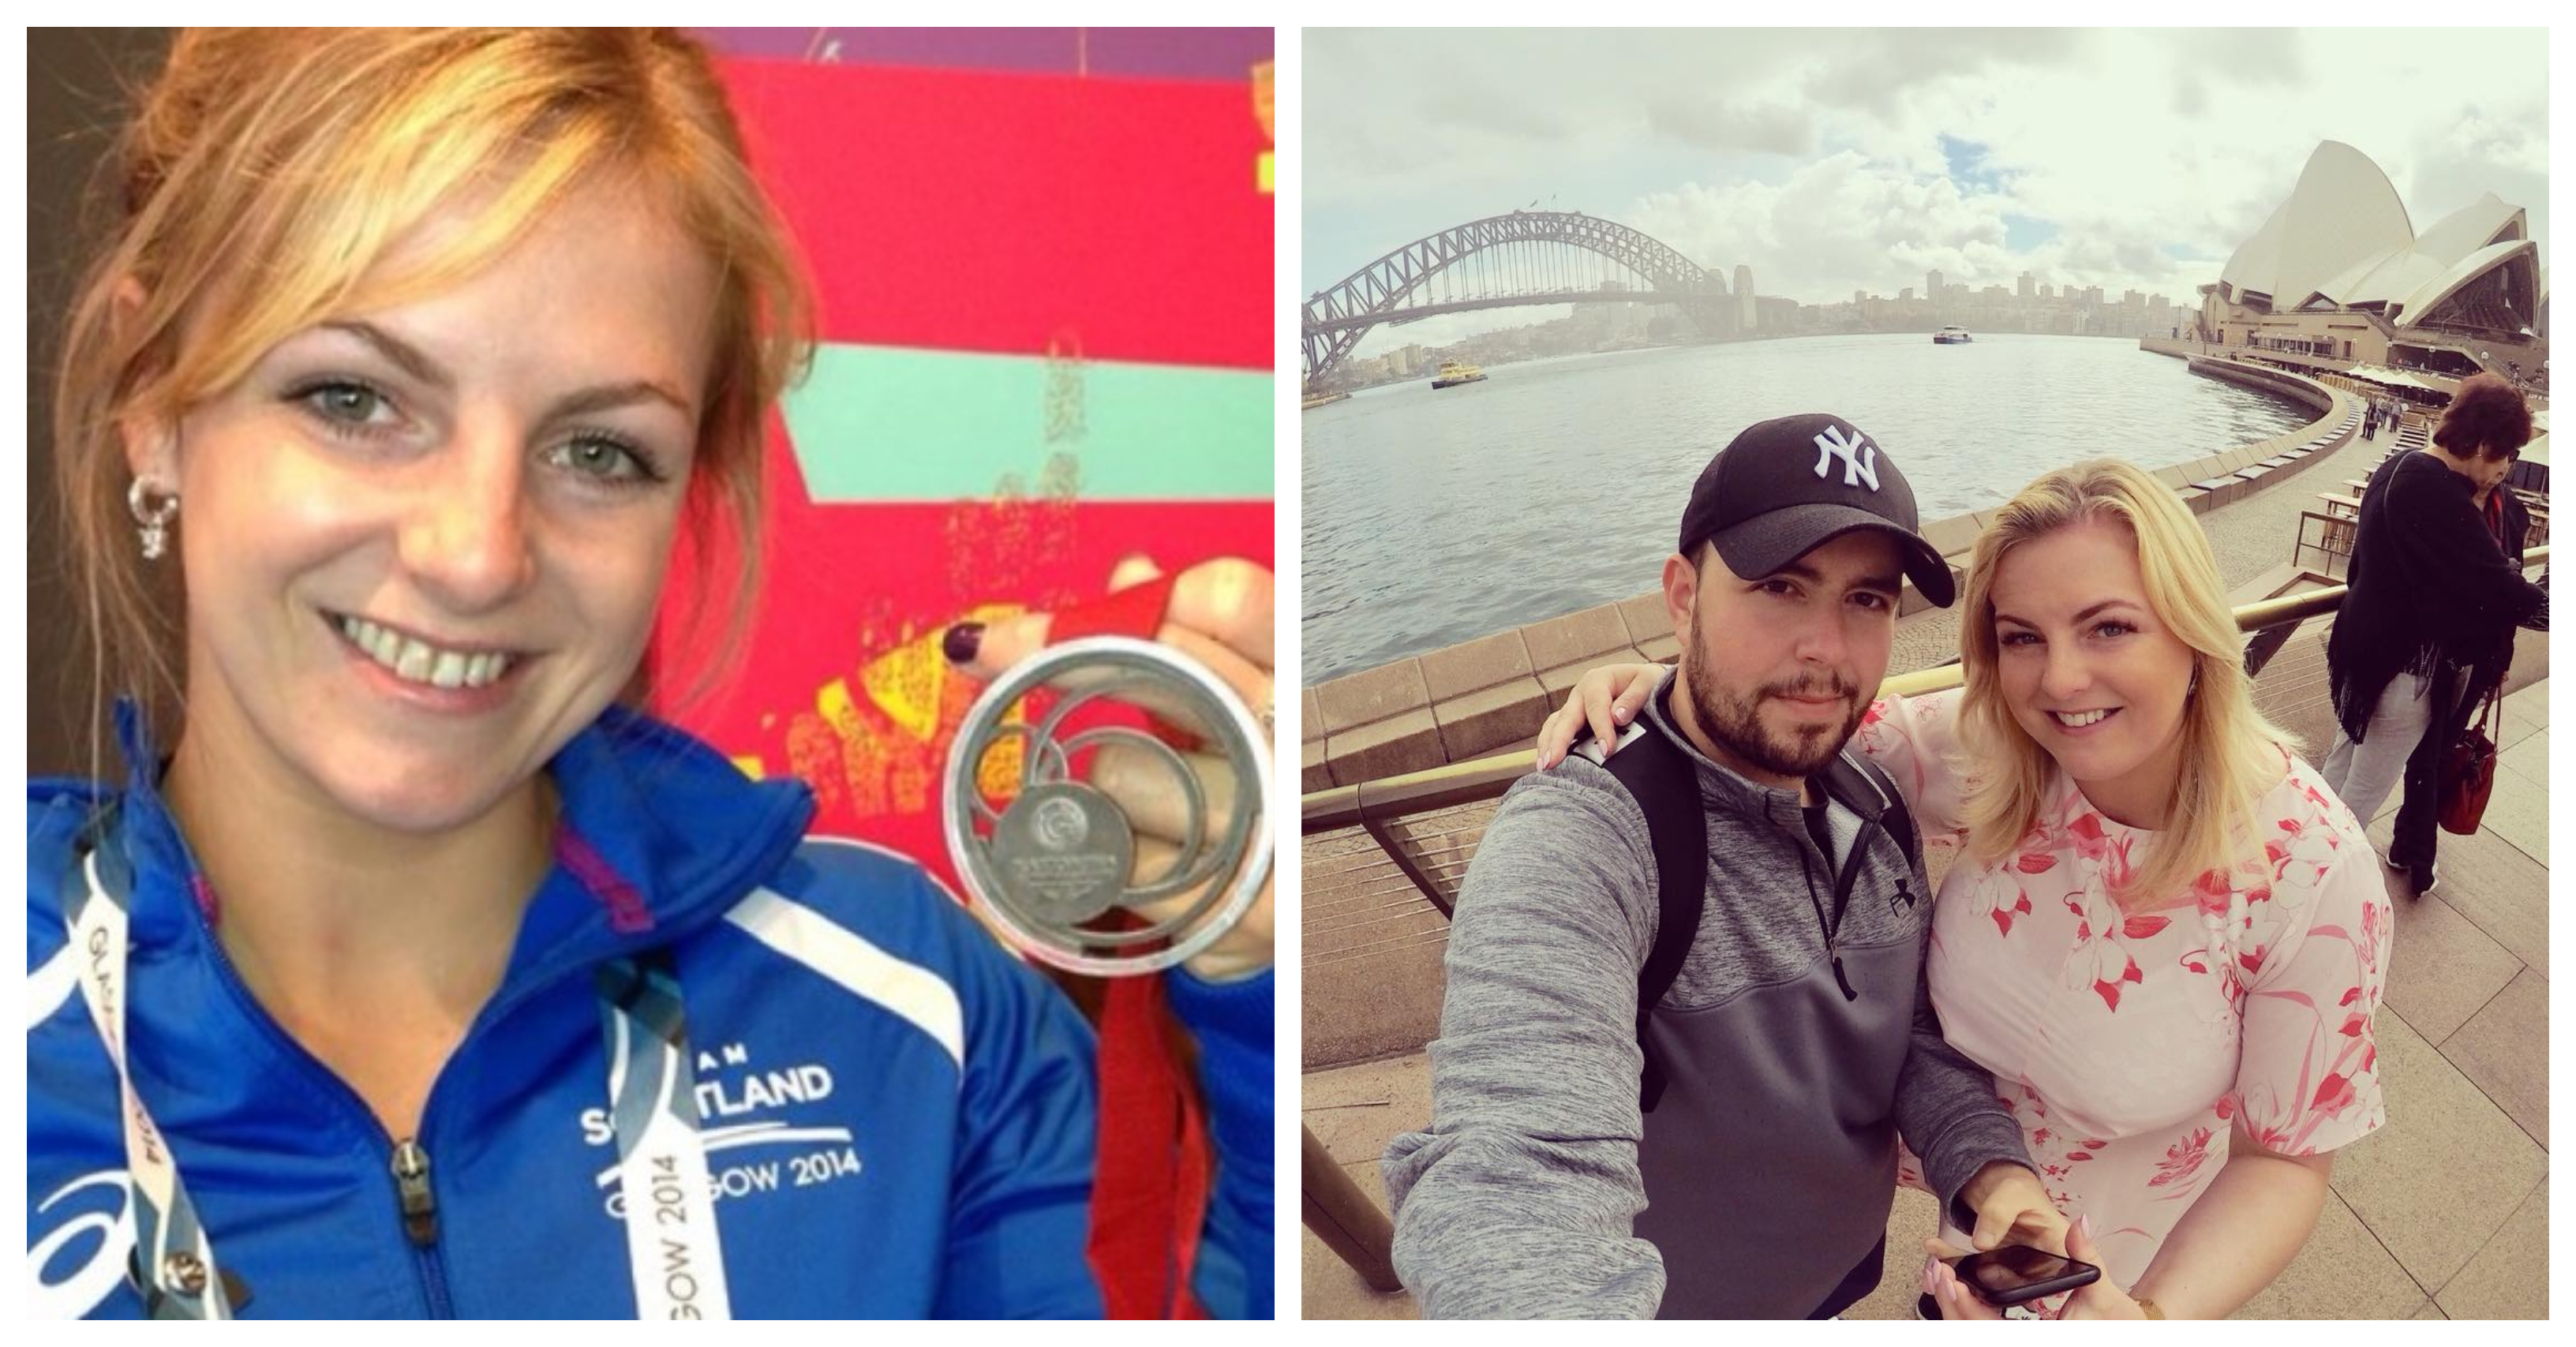 Stephanie with her Commonwealth Games medal in 2014 (left) and on holiday with her partner Ally.